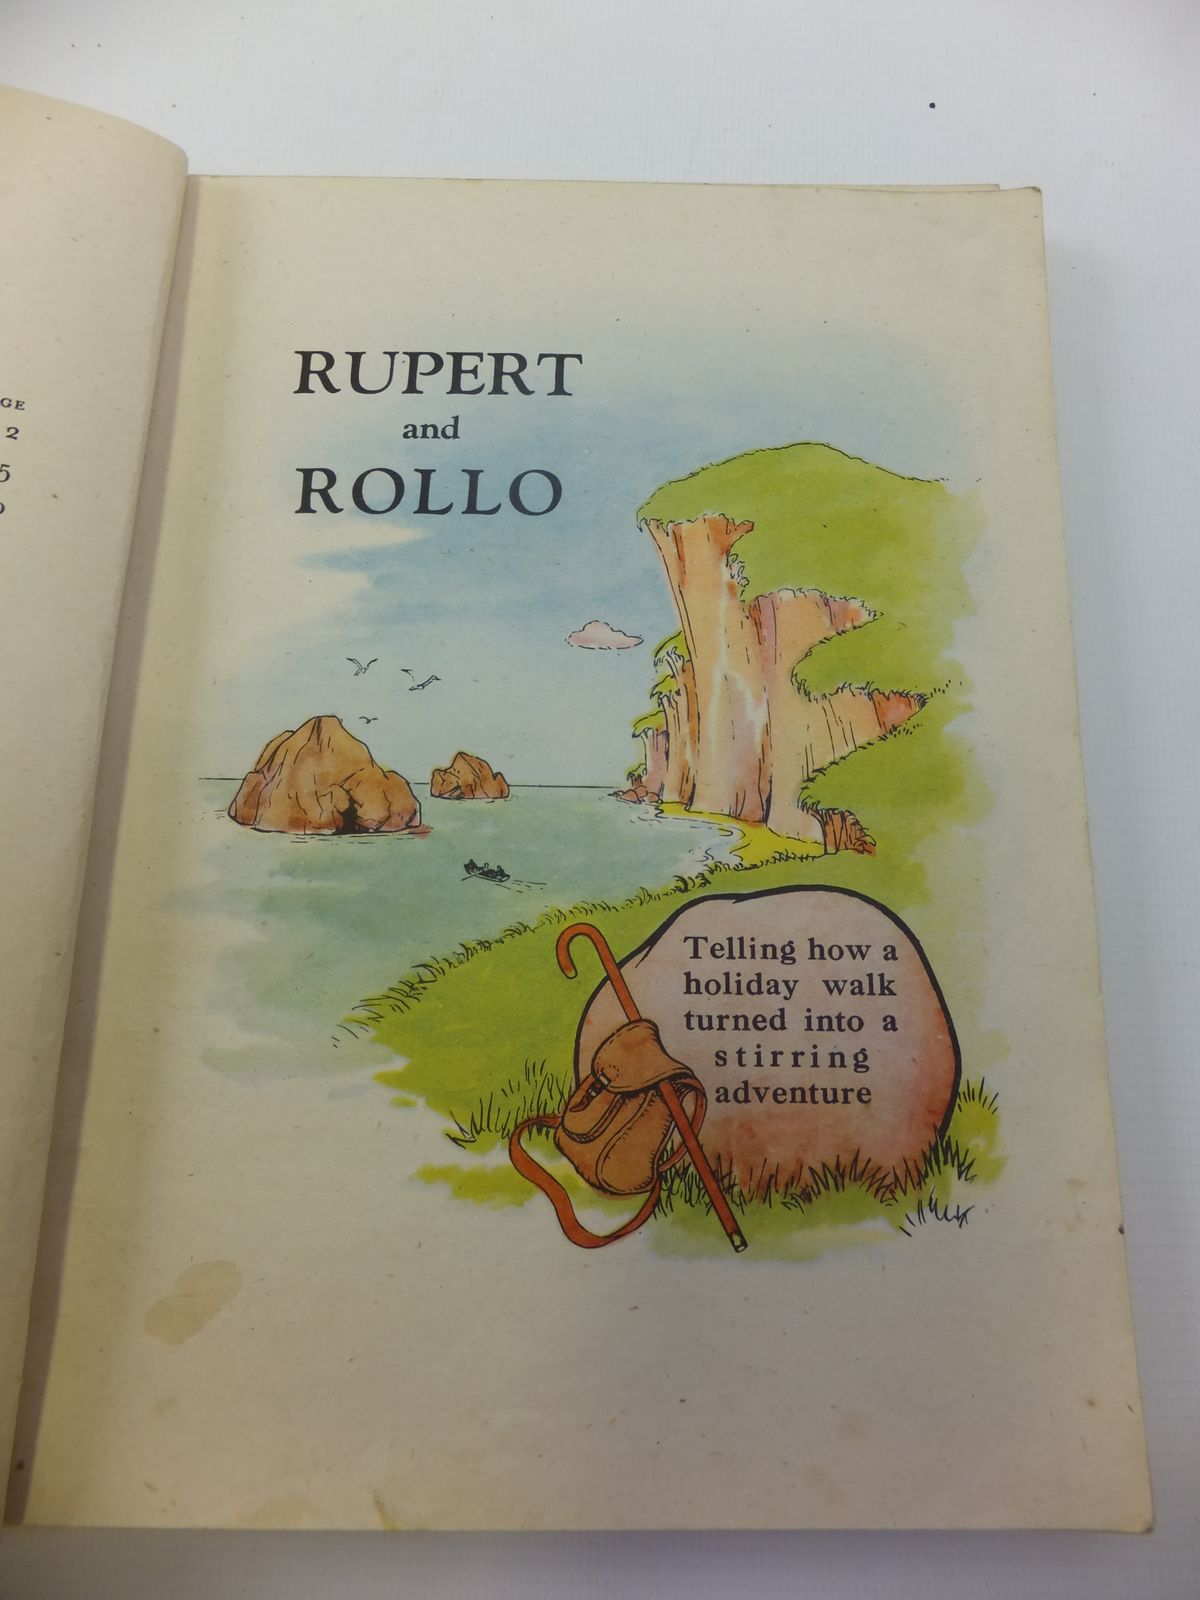 Photo of RUPERT ANNUAL 1944 - RUPERT IN MORE ADVENTURES written by Bestall, Alfred illustrated by Bestall, Alfred published by Daily Express (STOCK CODE: 1812264)  for sale by Stella & Rose's Books